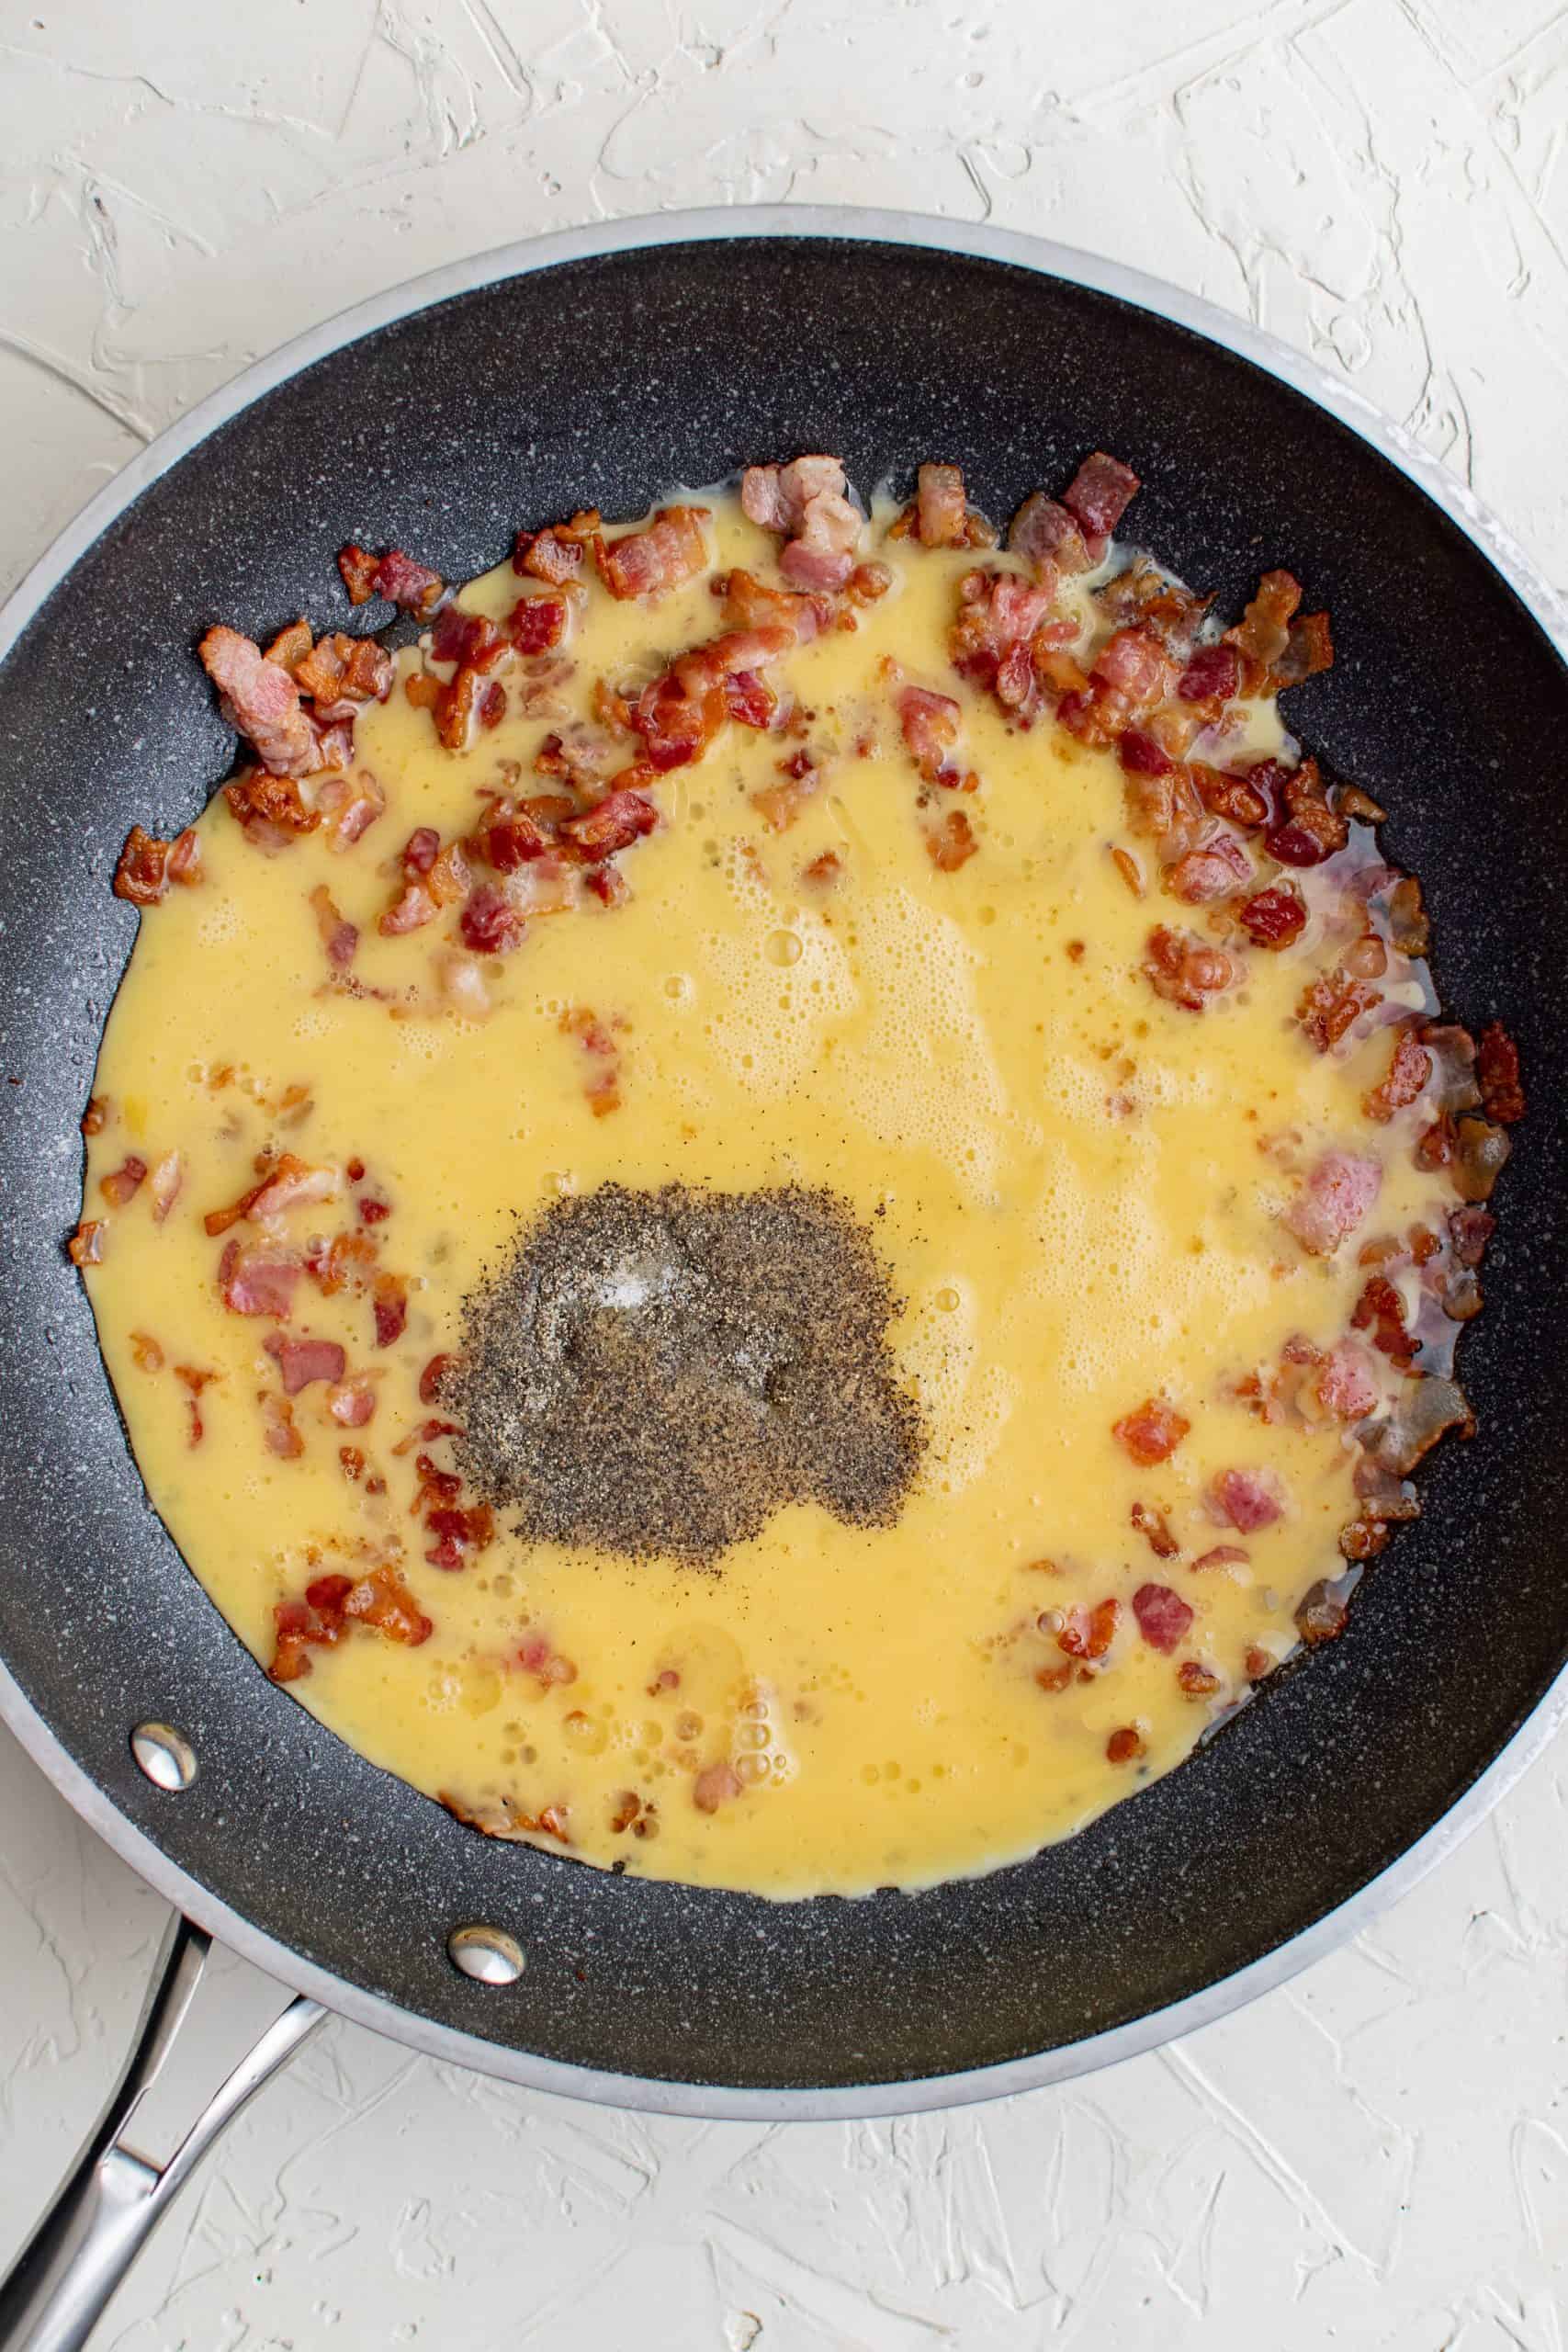 Eggs added to cooked bacon in pan.